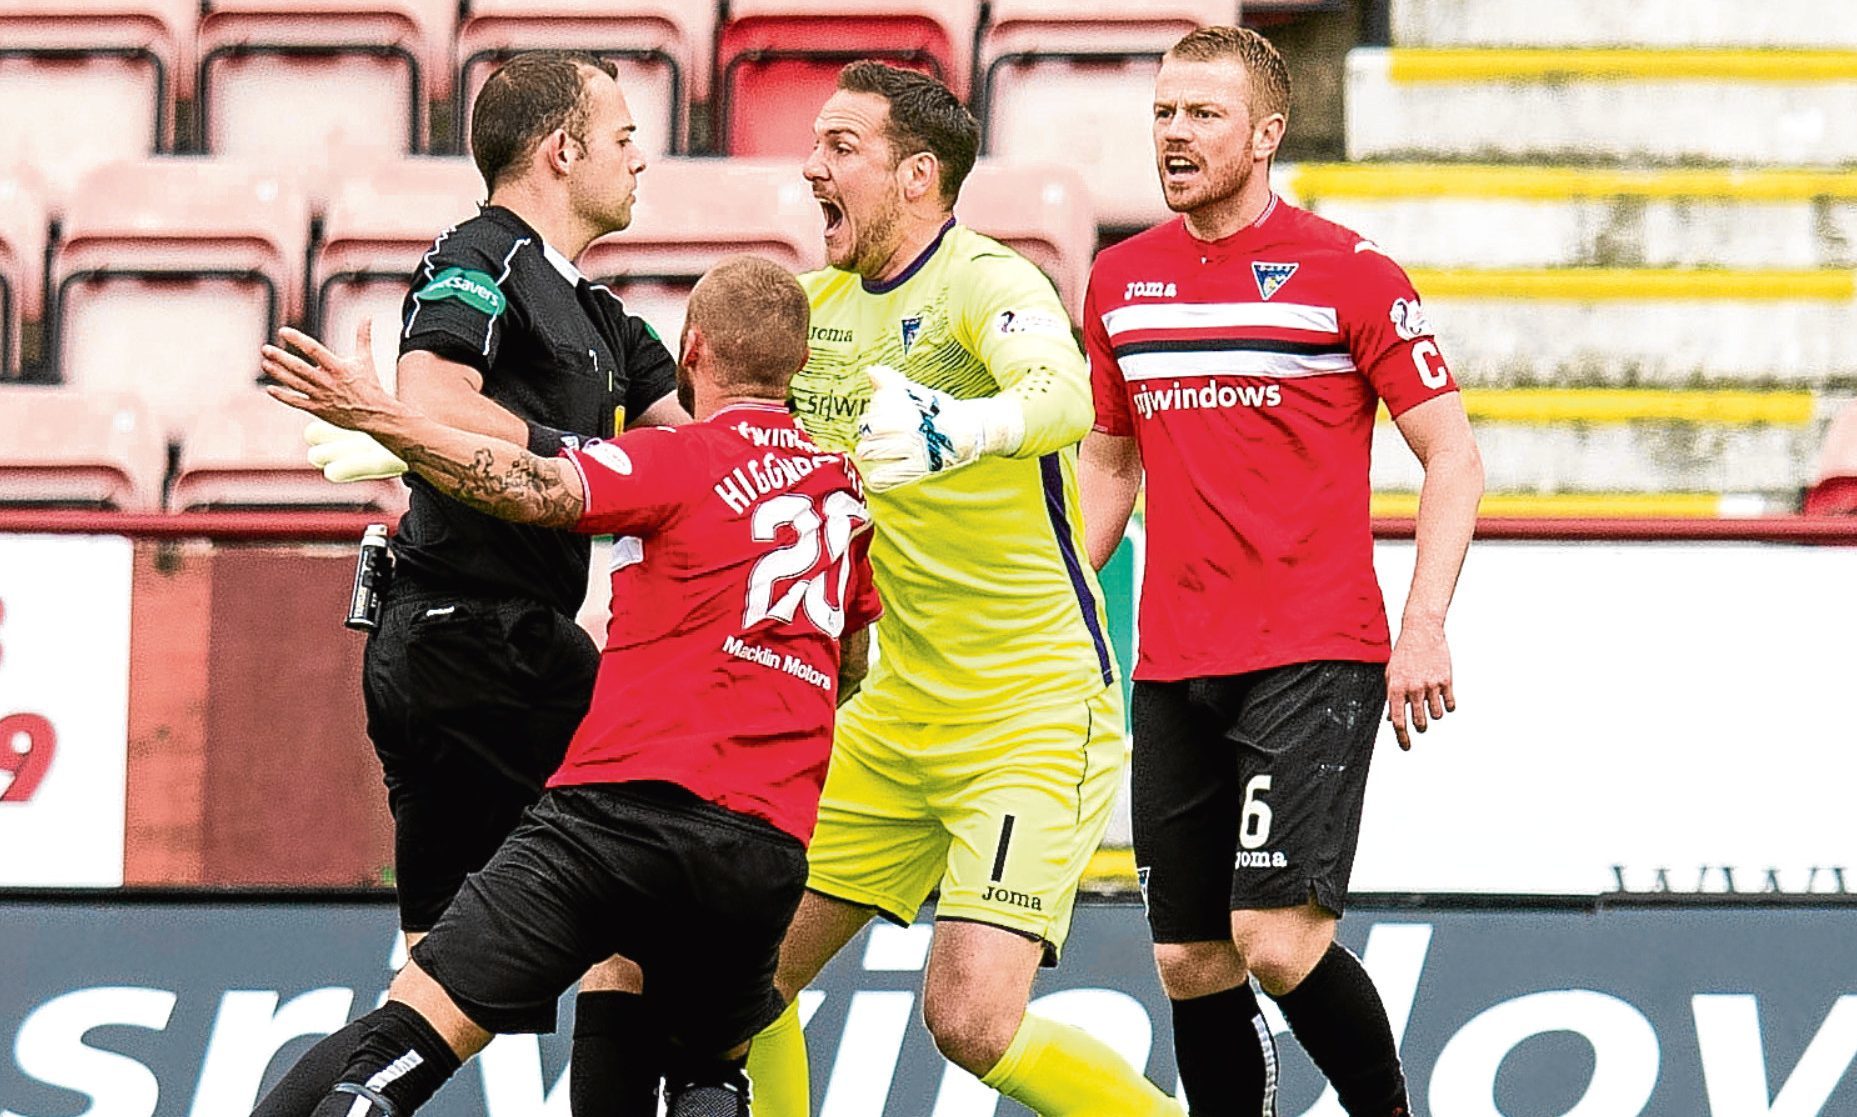 Dunfermline players contest the penalty decision.